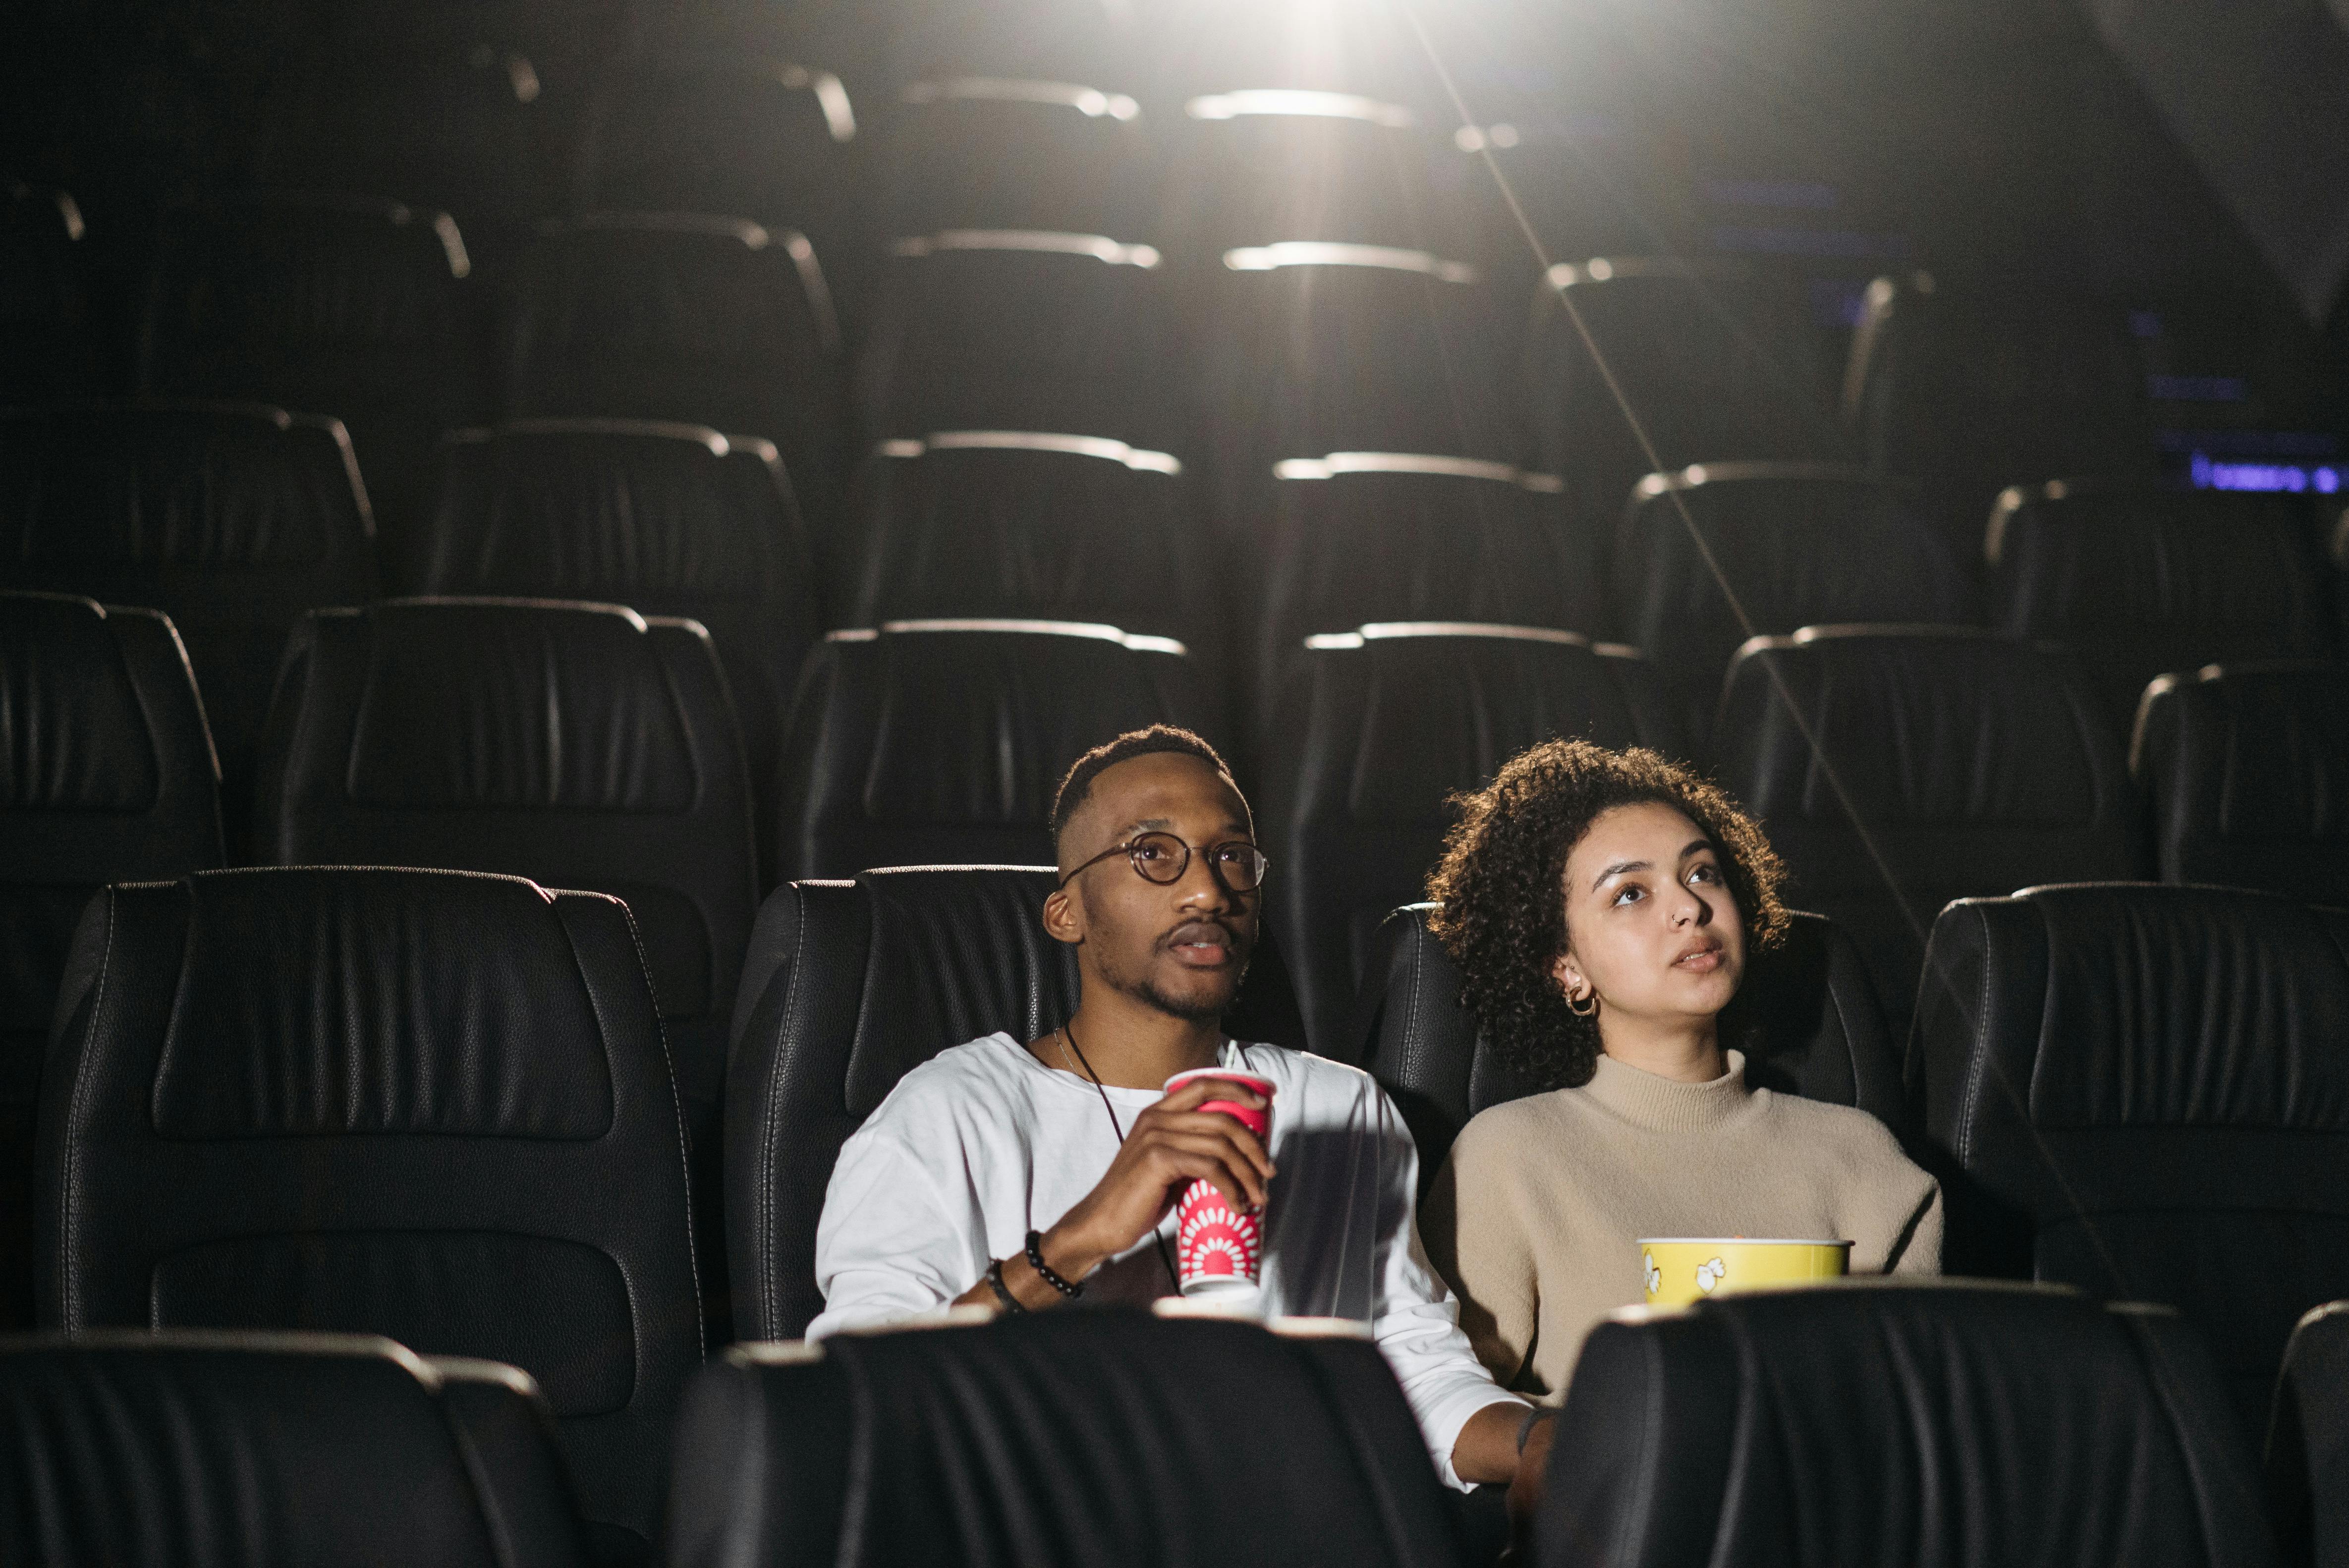 Two people in a movie theater.